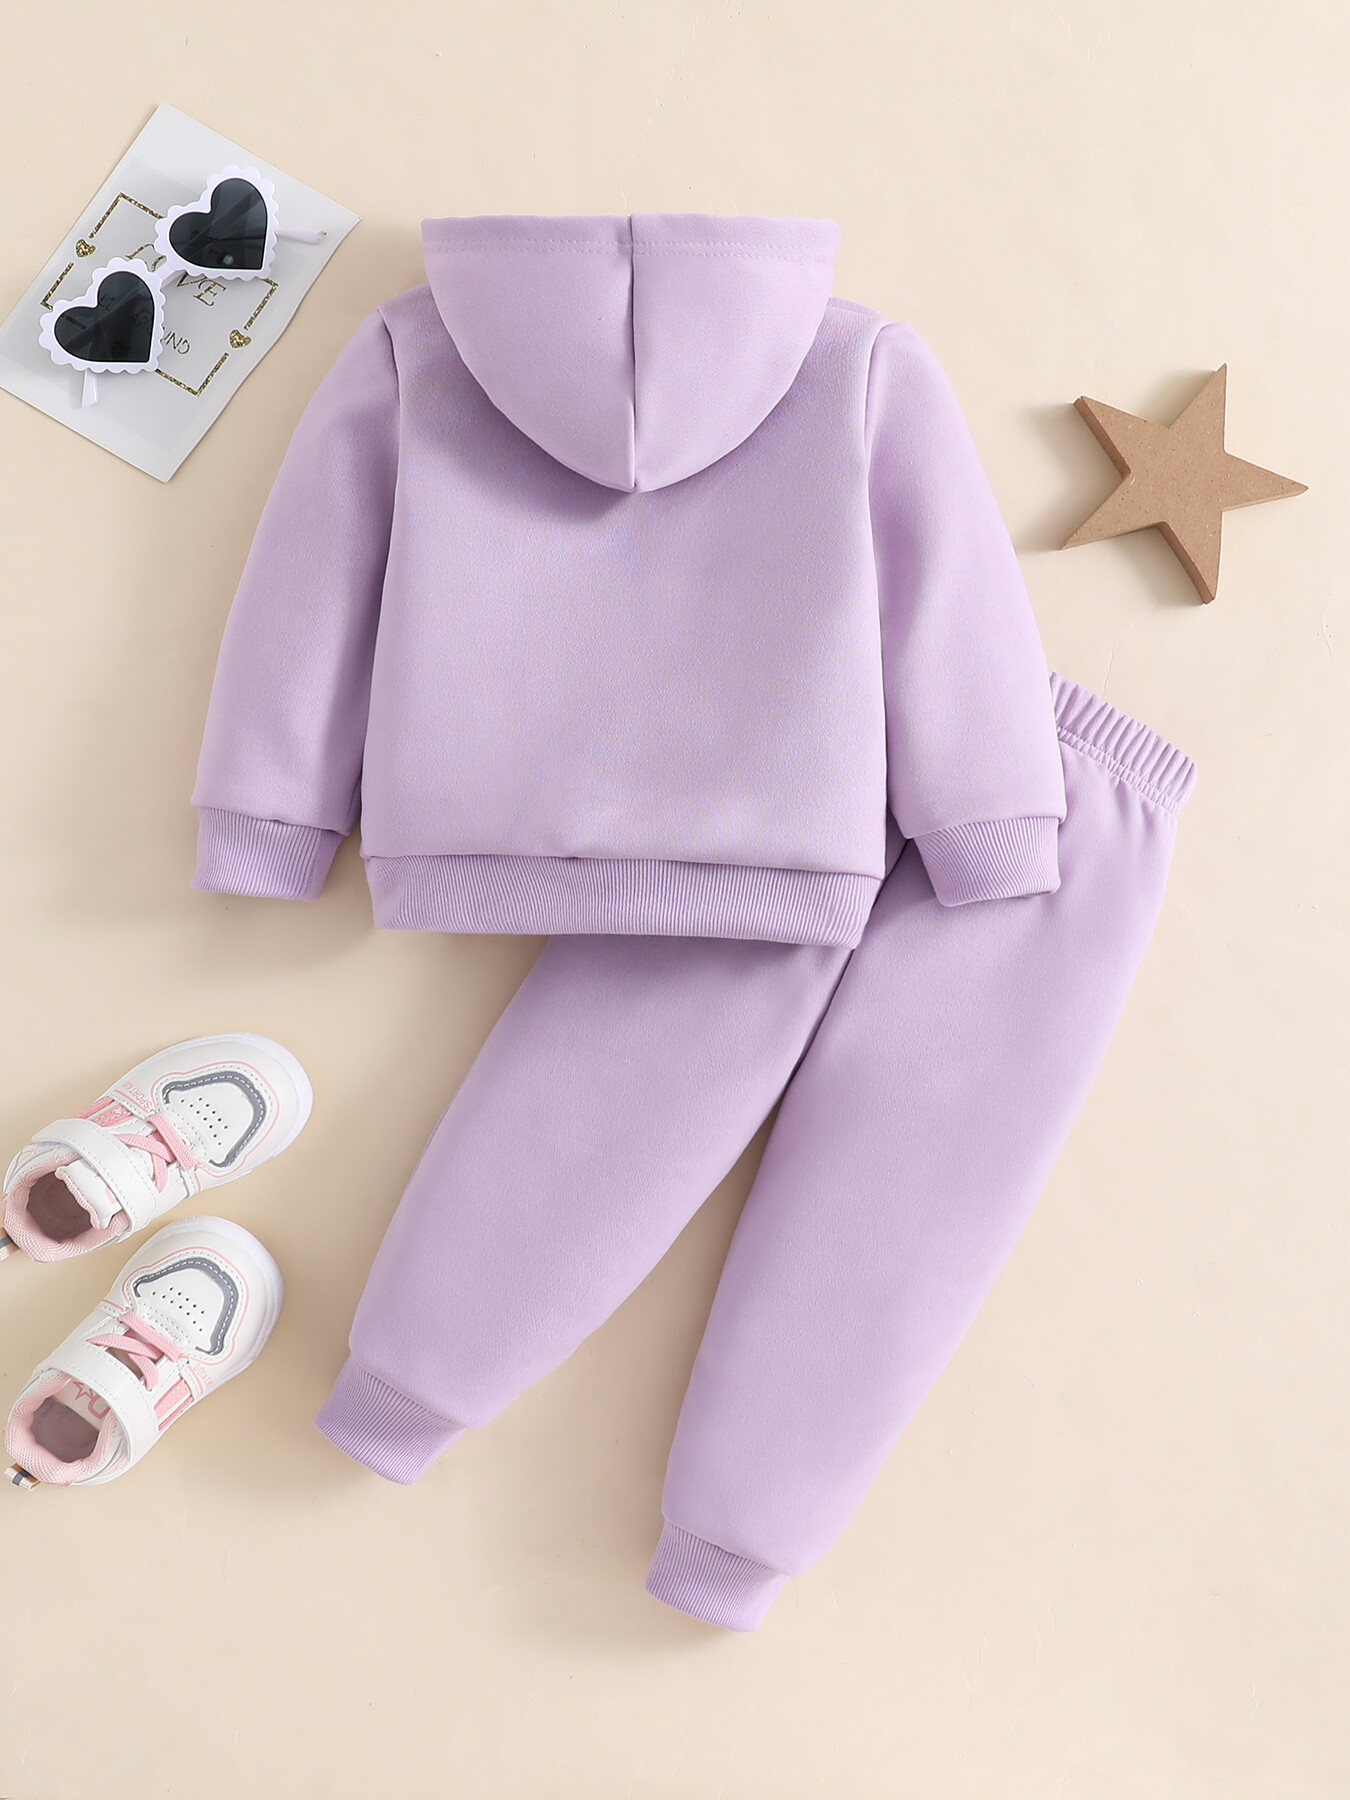 Baby Shower Pant Suits for Women